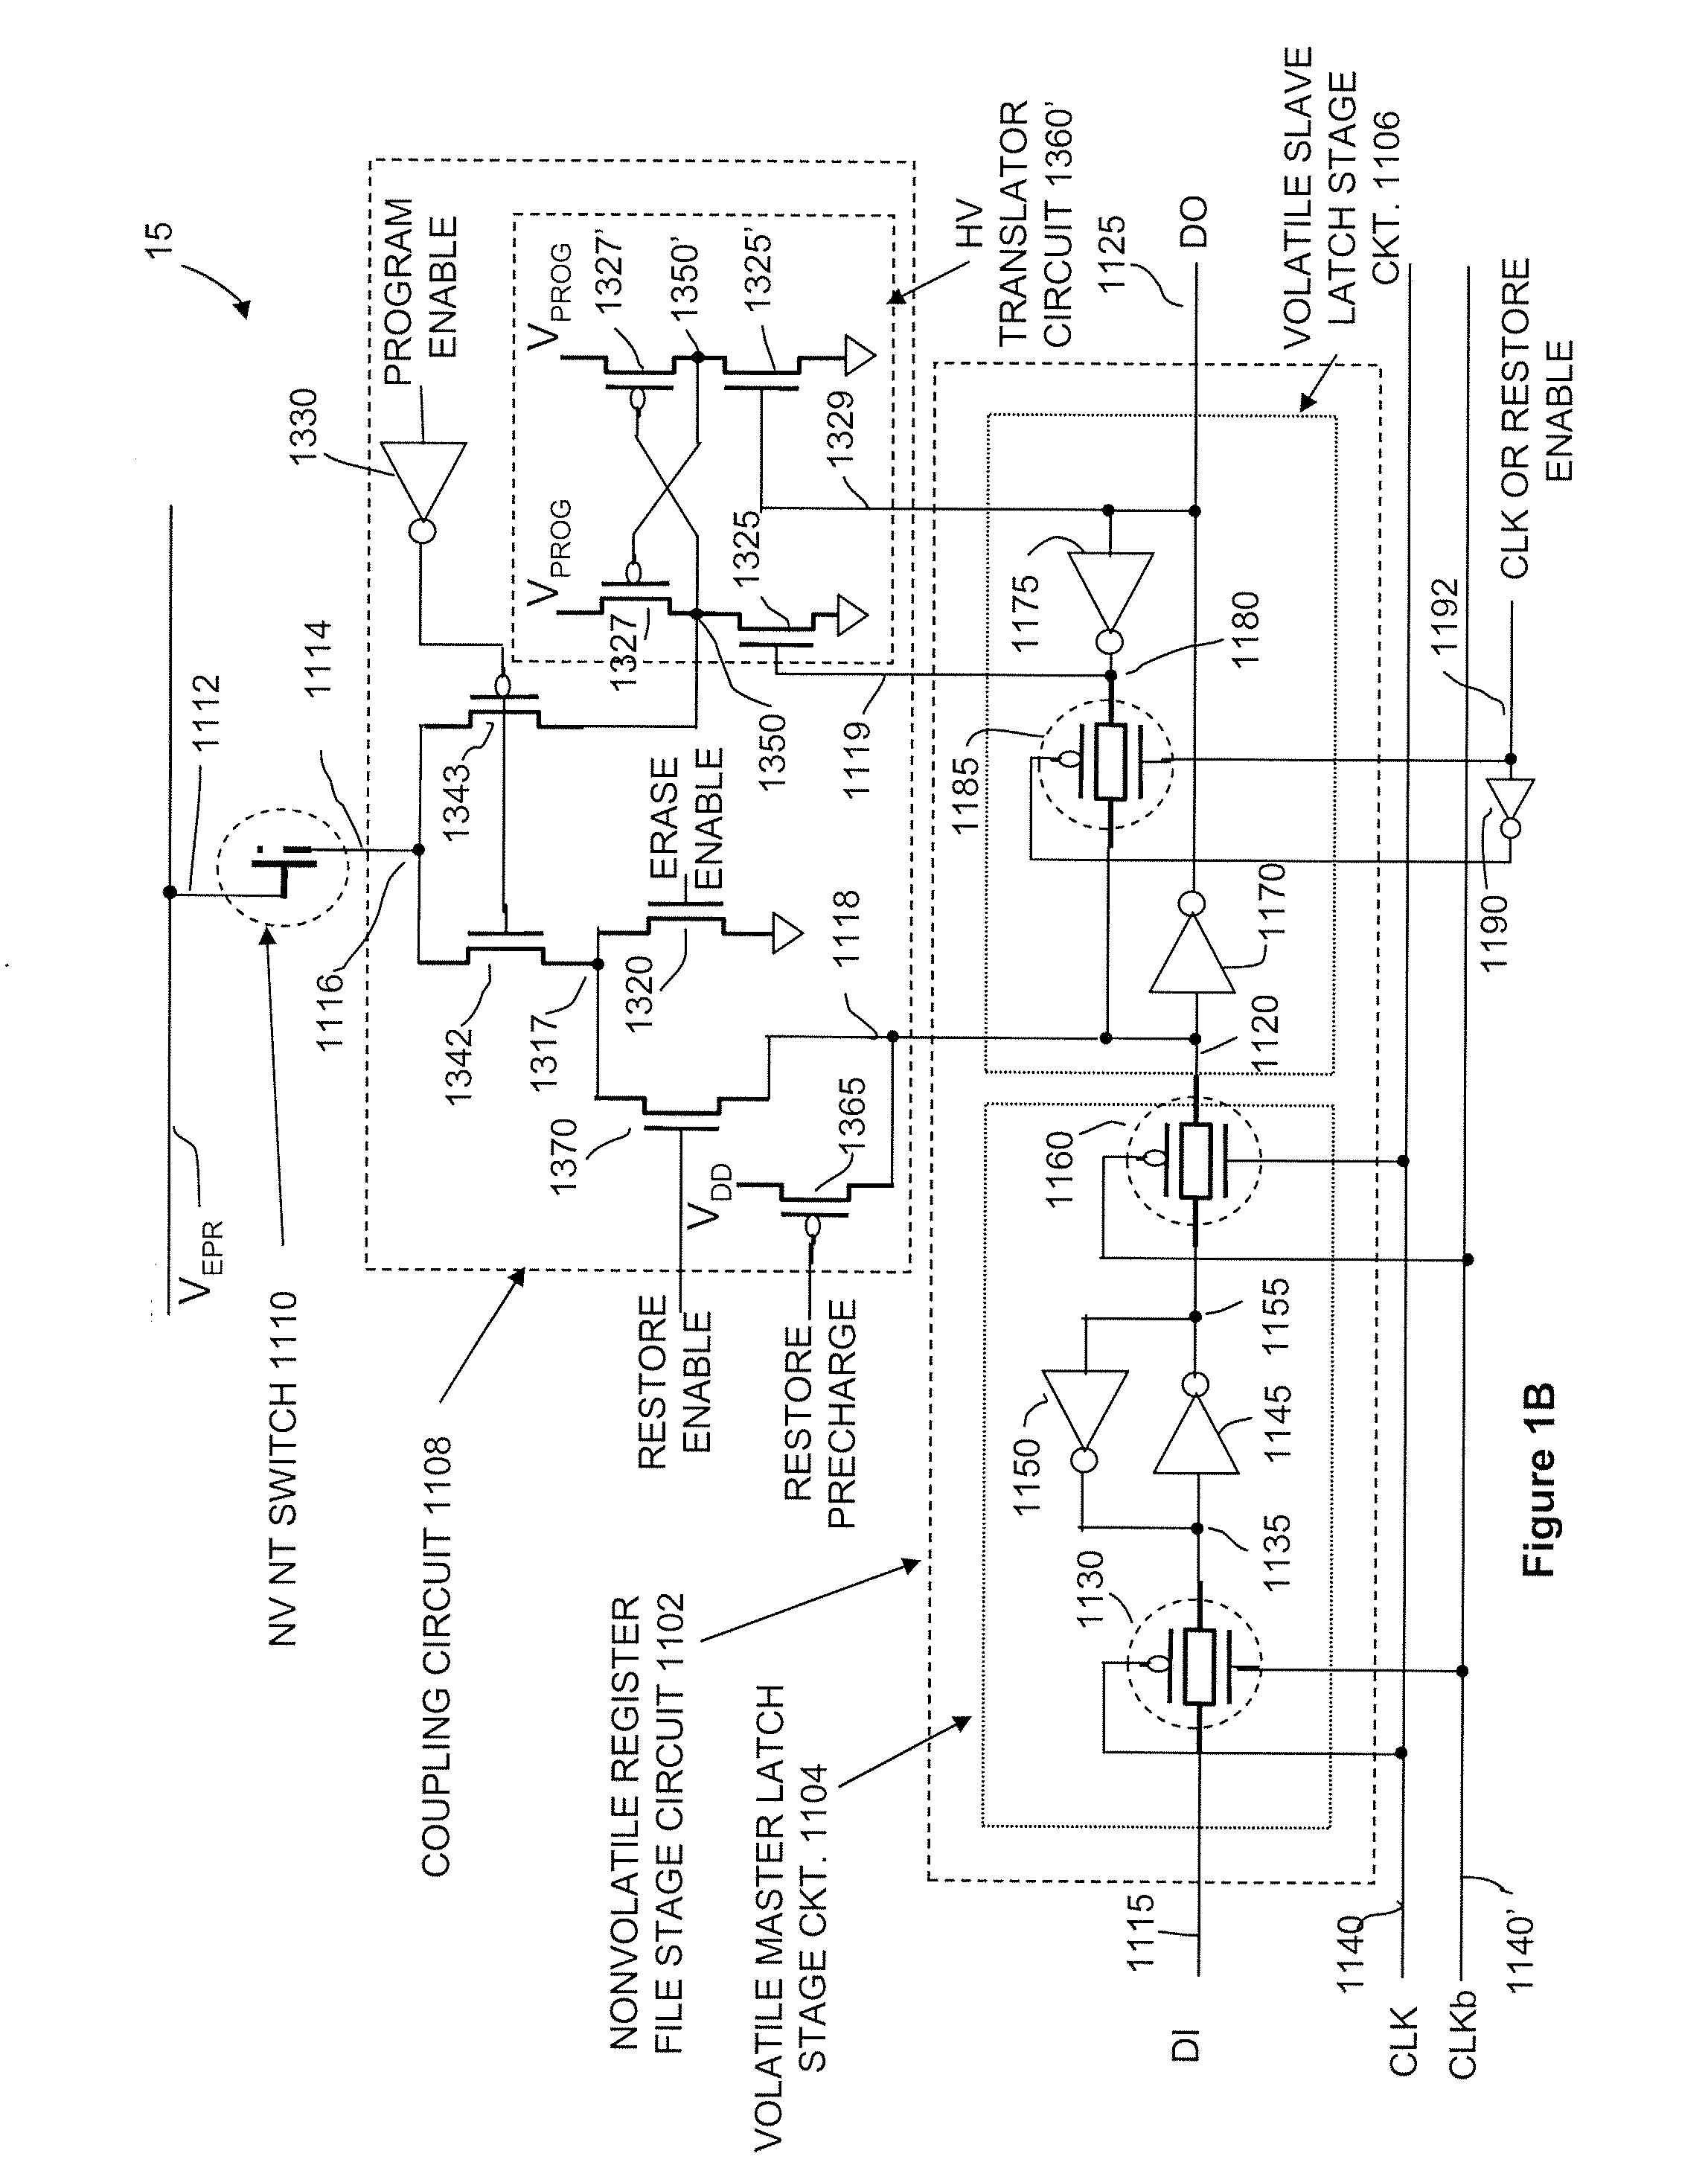 Latch circuits and operation circuits having scalable nonvolatile nanotube switches as electronic fuse replacement elements